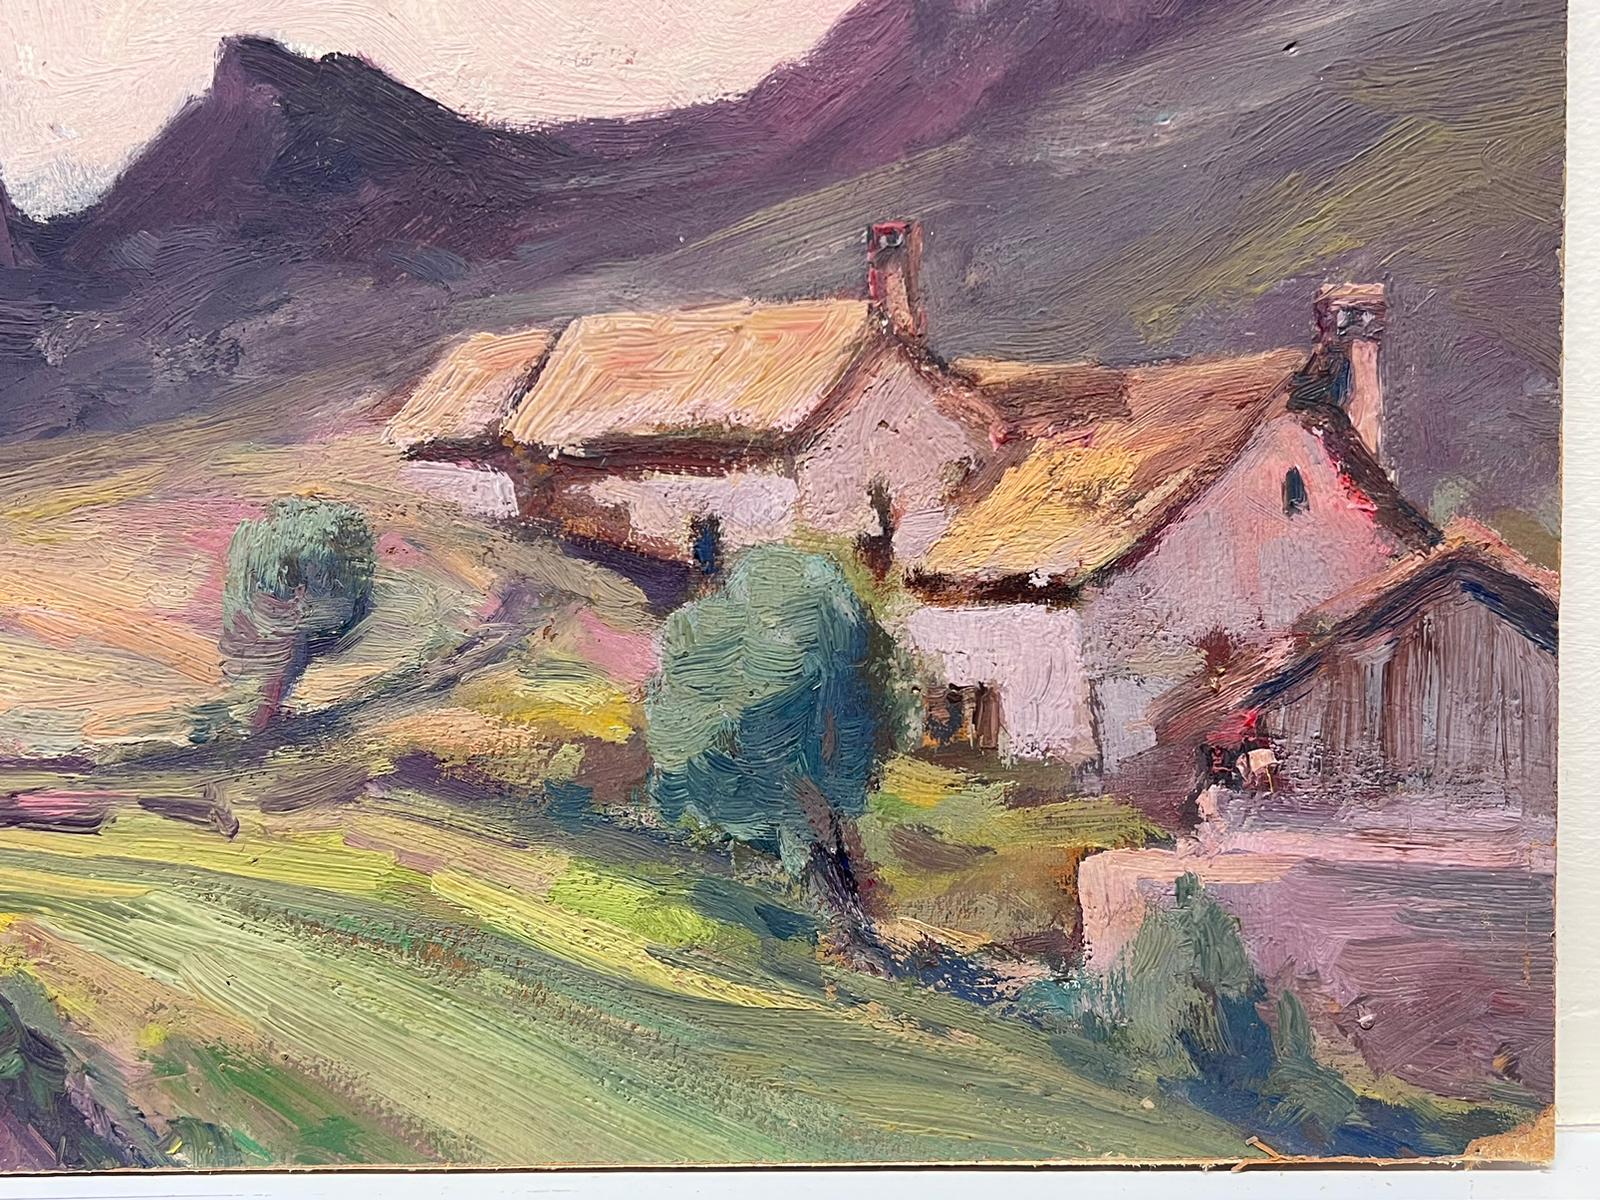 Artist/ School: Leon Hatot (French 1883-1953)

Title: Impressionist oil painting 

Medium: oil painting on thick paper, stuck on board unframed.

Size: painting: 11.5 x 19.5 inches

Provenance: all the paintings we have for sale by this artist have